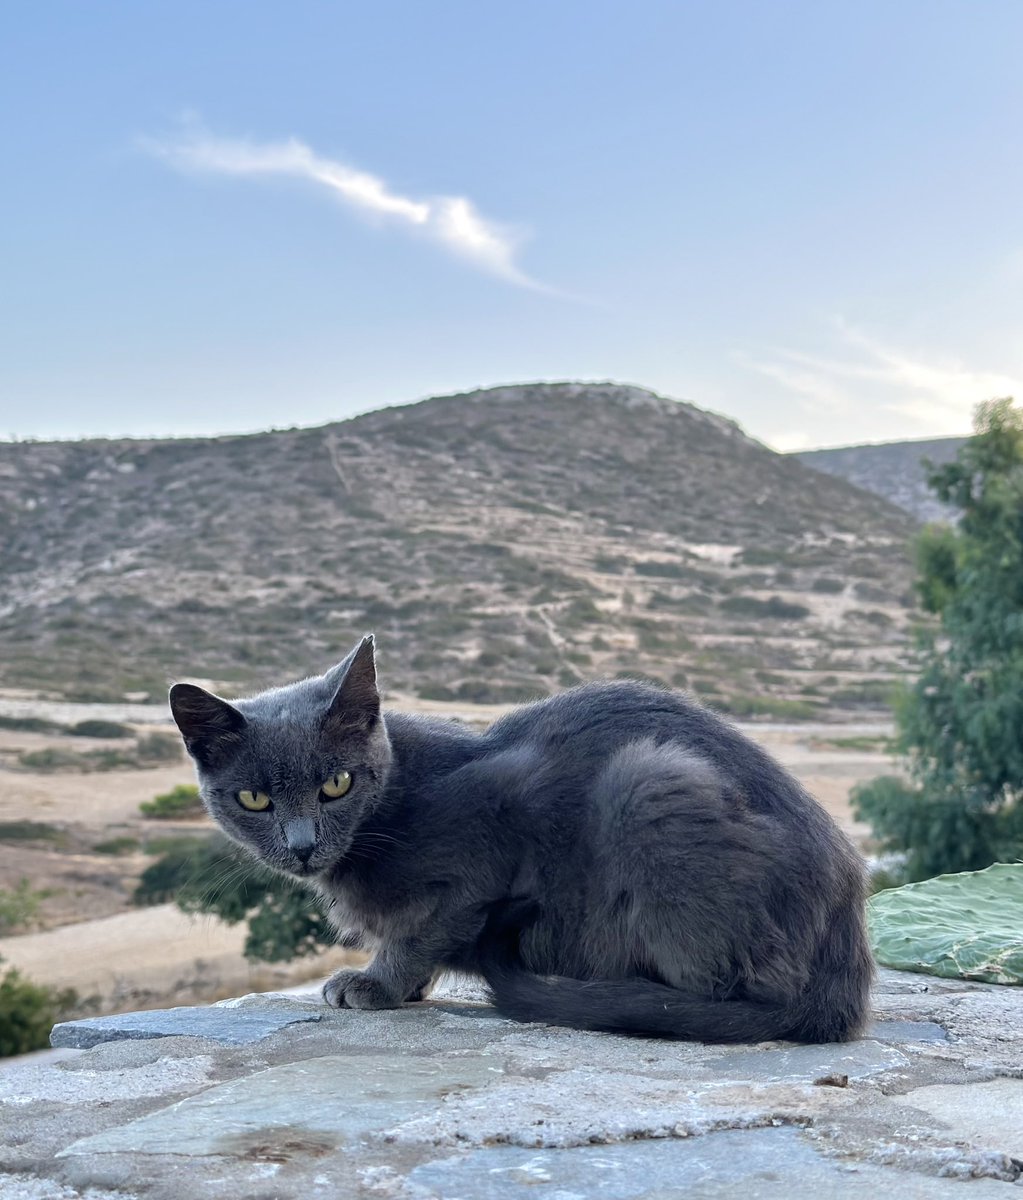 Meet one of the Aegean cats pictured as a wispy white cloud hangs over Mt Papas on this tiny Greek island where we care for the cats.
You can help the #cats by making a small donation to fund vital medicines, neutering & food. Purr!
#CatsAreFamily 
gofundme.com/f/cats-of-irak…